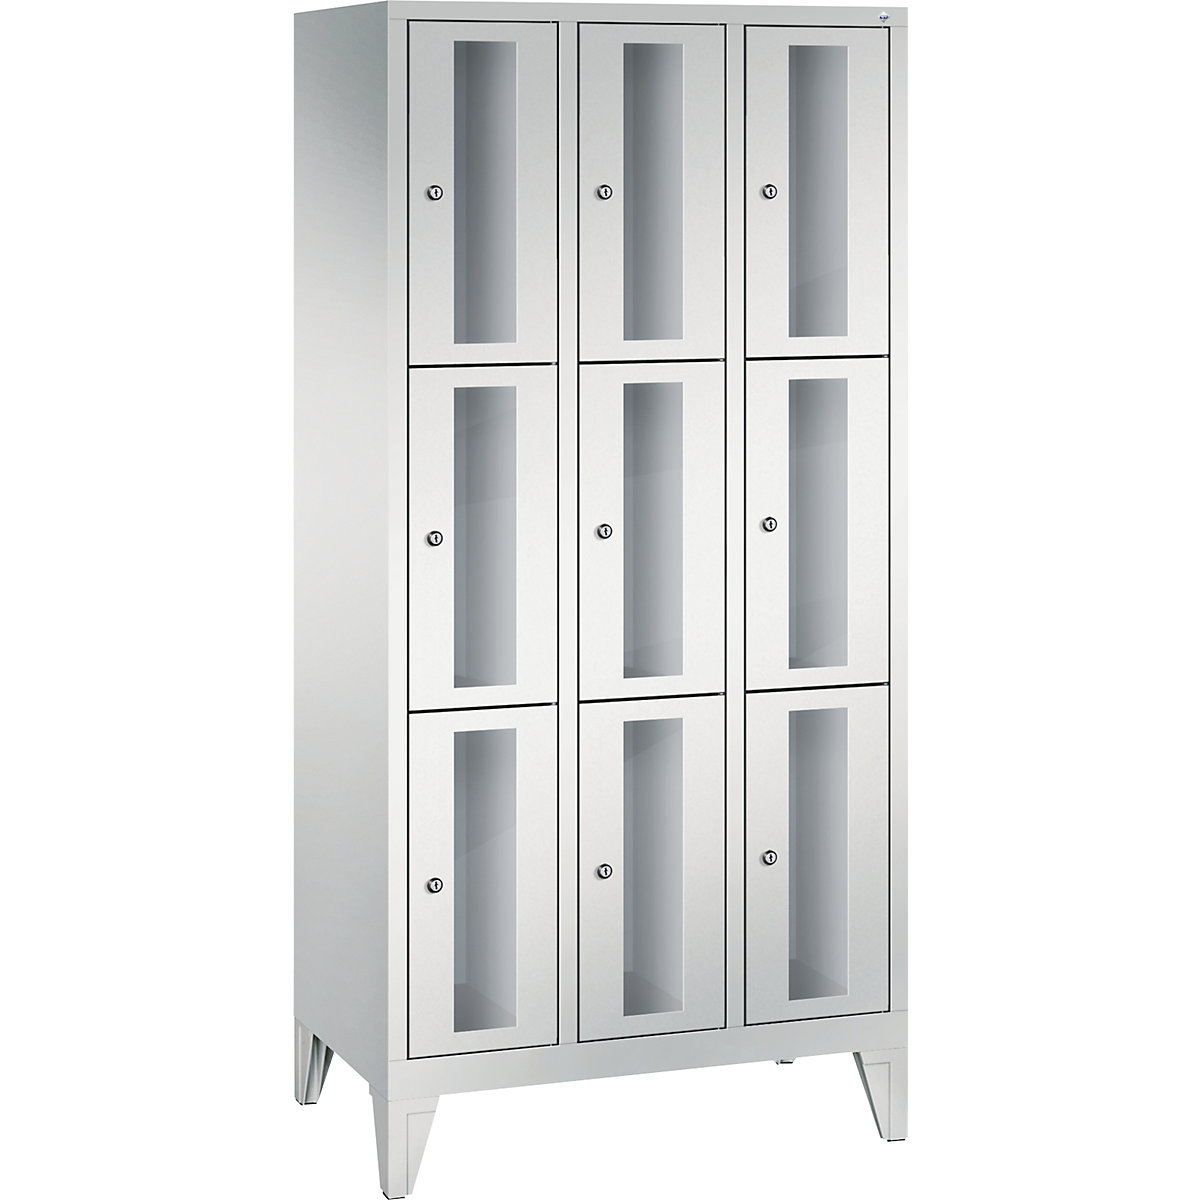 CLASSIC locker unit, compartment height 510 mm, with feet - C+P